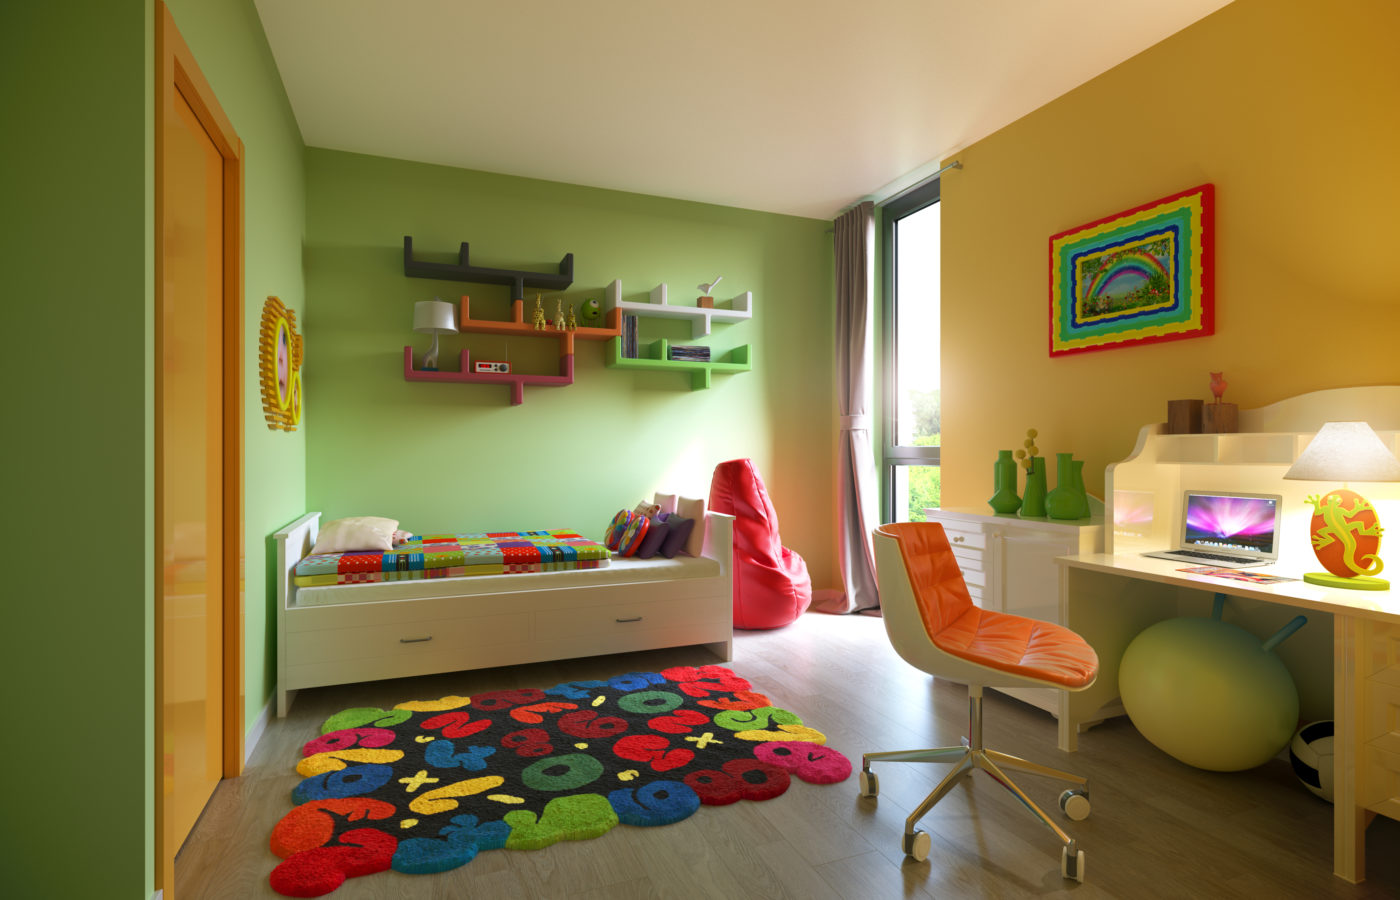 Contemporary Child's Room. Produced by the award winning team at G-Net 3D. Interior Design CGI model. 3D Visualisation Company. Corner view, with custard yellow and pea green contrasting walls with colourful rug, and desk in right hand corner, with single bed in opposite corner near pine door. Floor to ceiling window pours light over the bed.